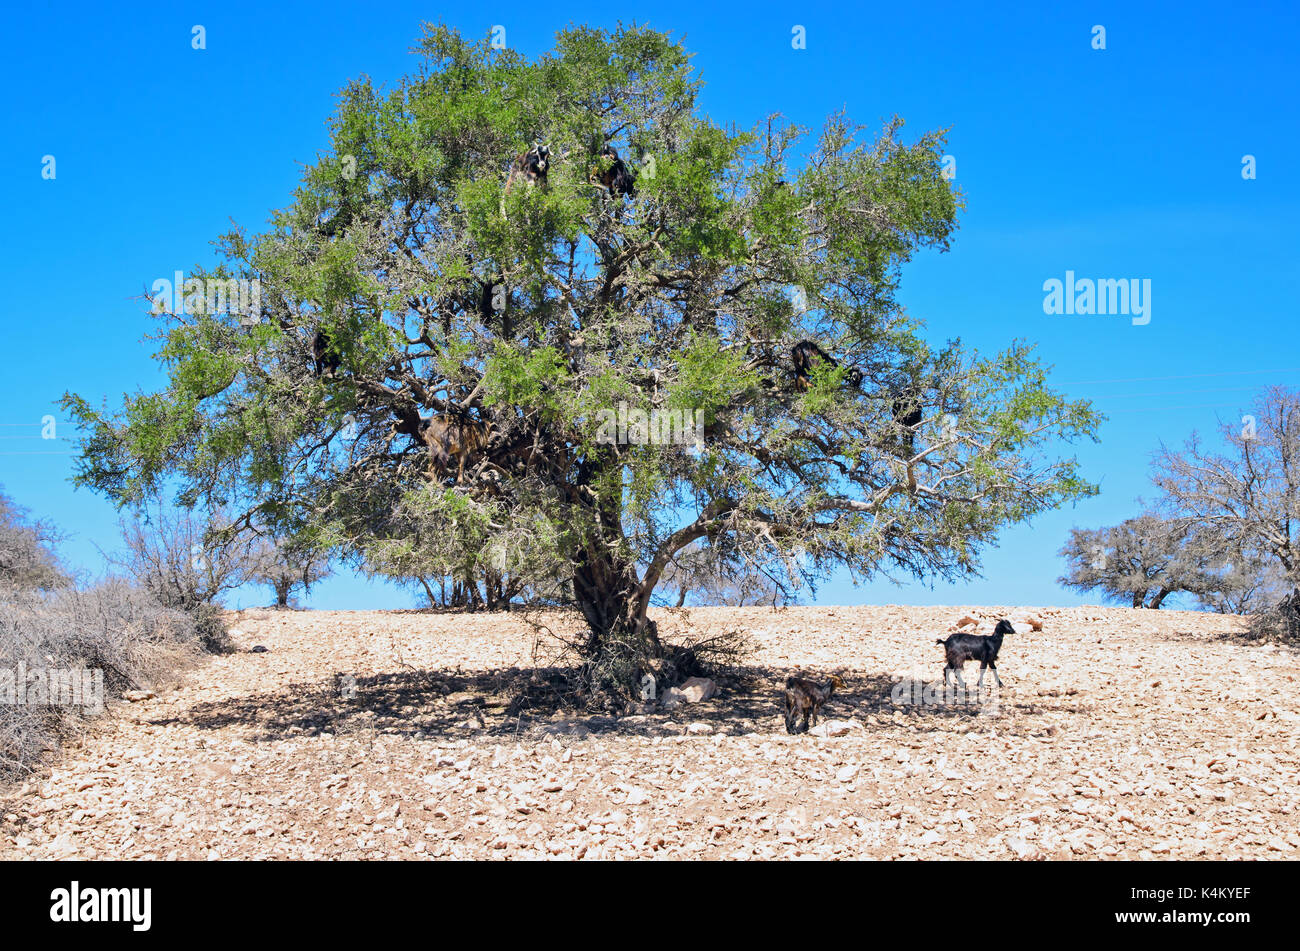 A goats on a tree in Morocco Stock Photo